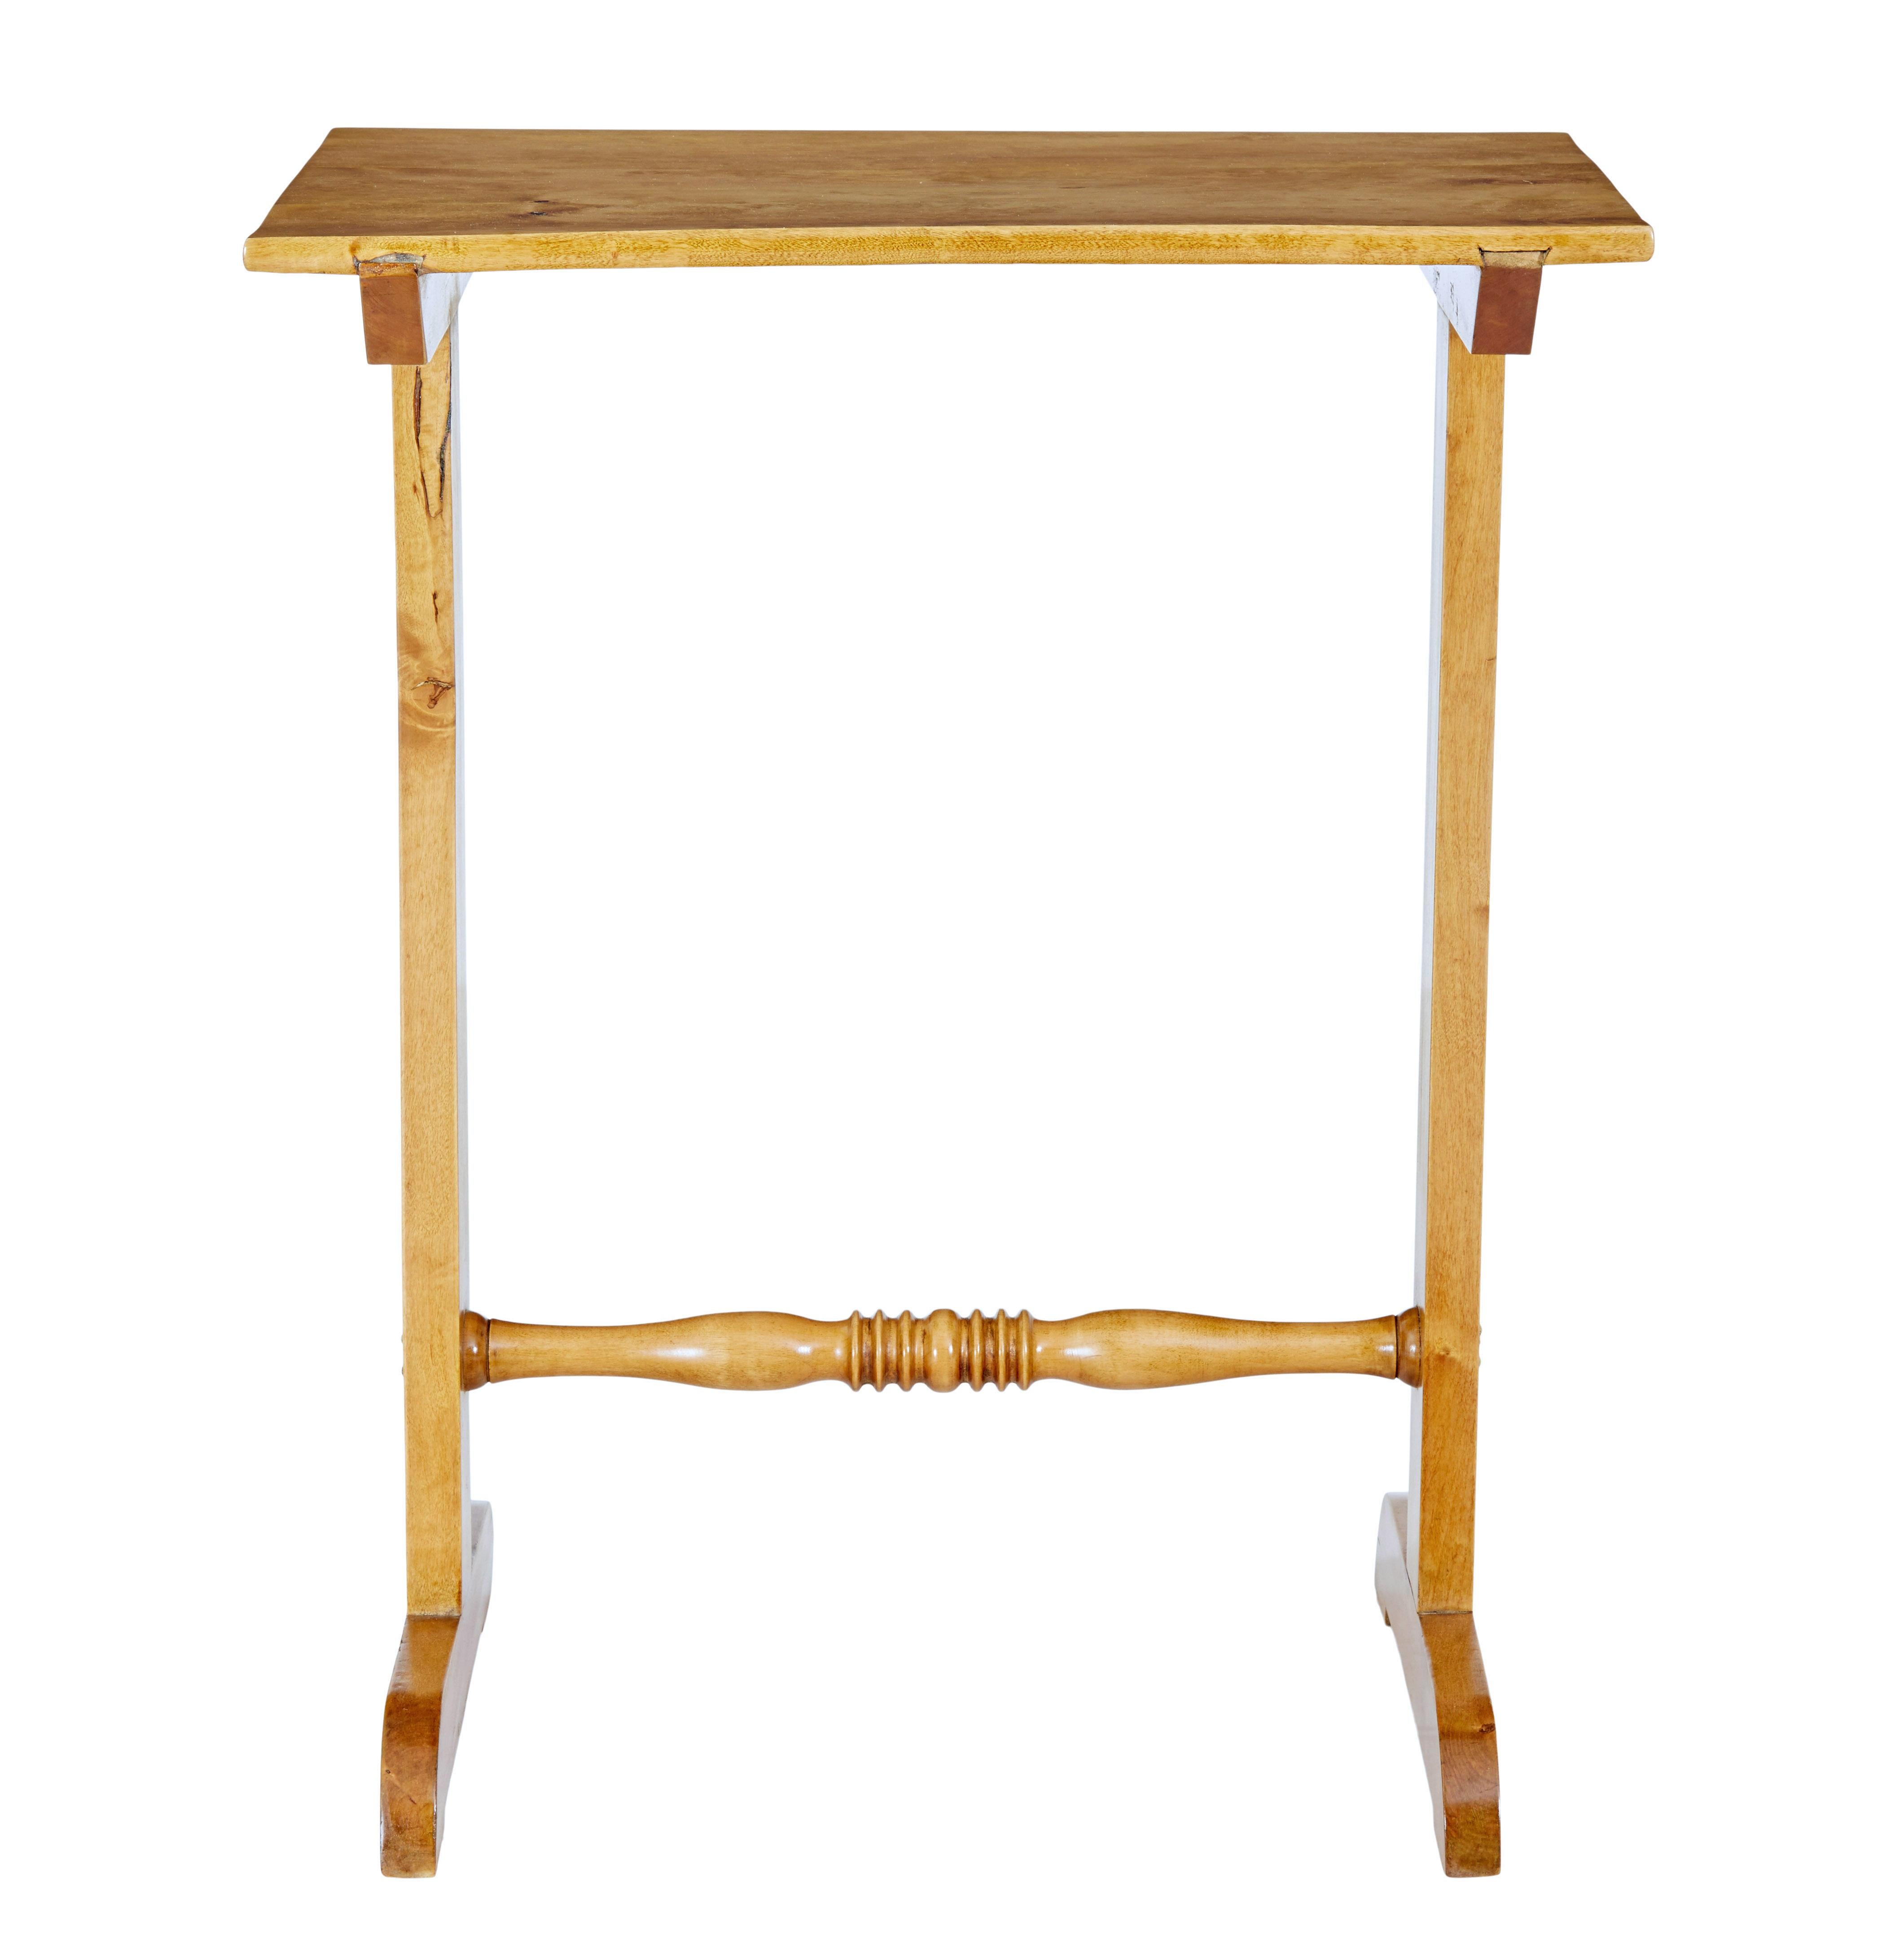 Swedish early 20th century birch side table circa 1900.

Good functional piece of furniture with numerous possibilities around the home.  This could be used in the living room as a lamp table, hall table or in the bedroom.

Rectangular birch top,